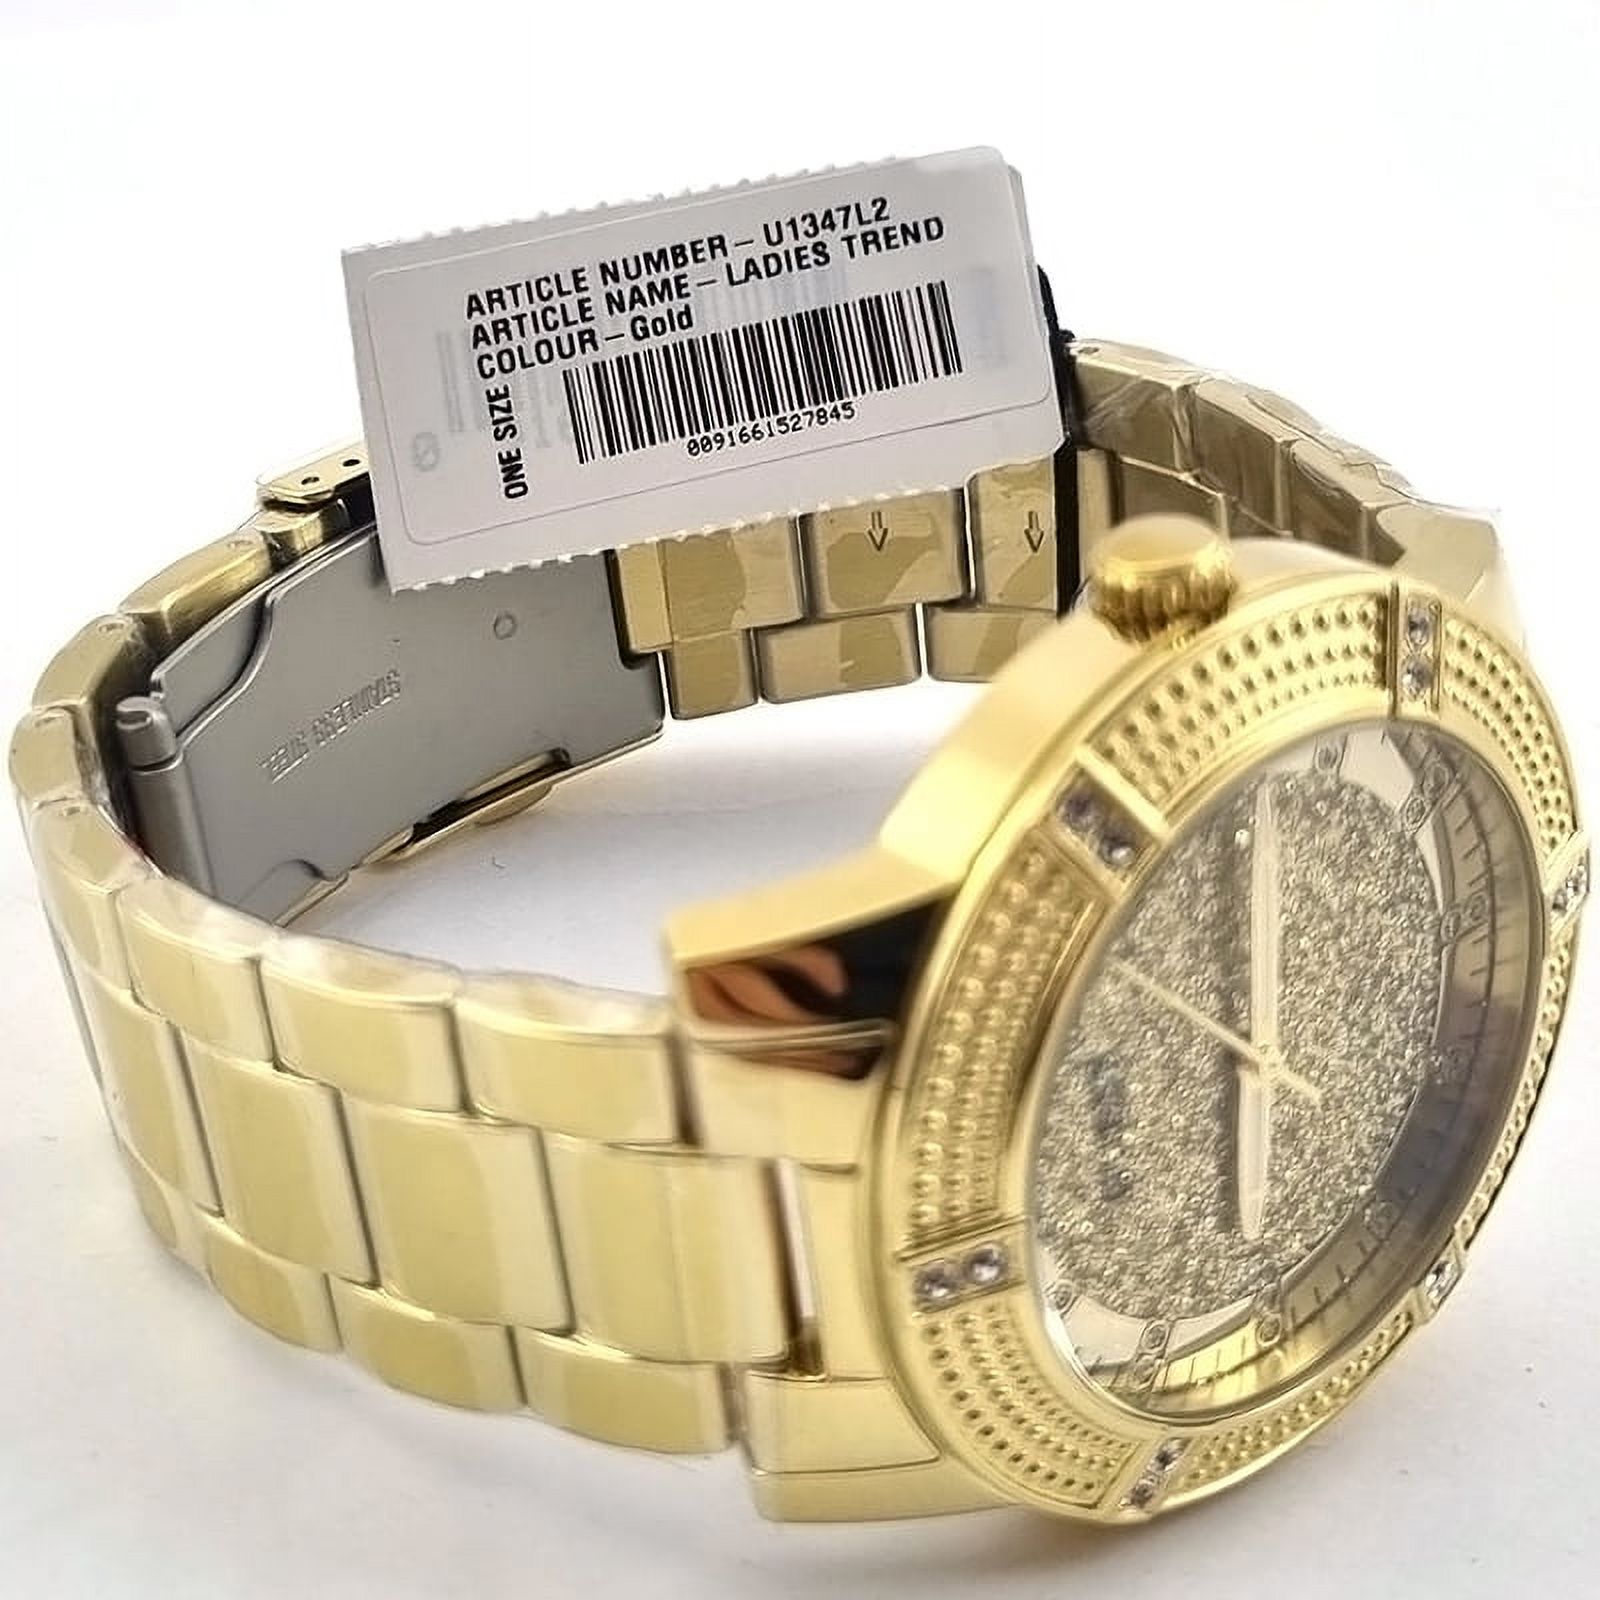 GUESS Gold-Tone Stainless Steal Analog Watch U1347L2 - image 2 of 3